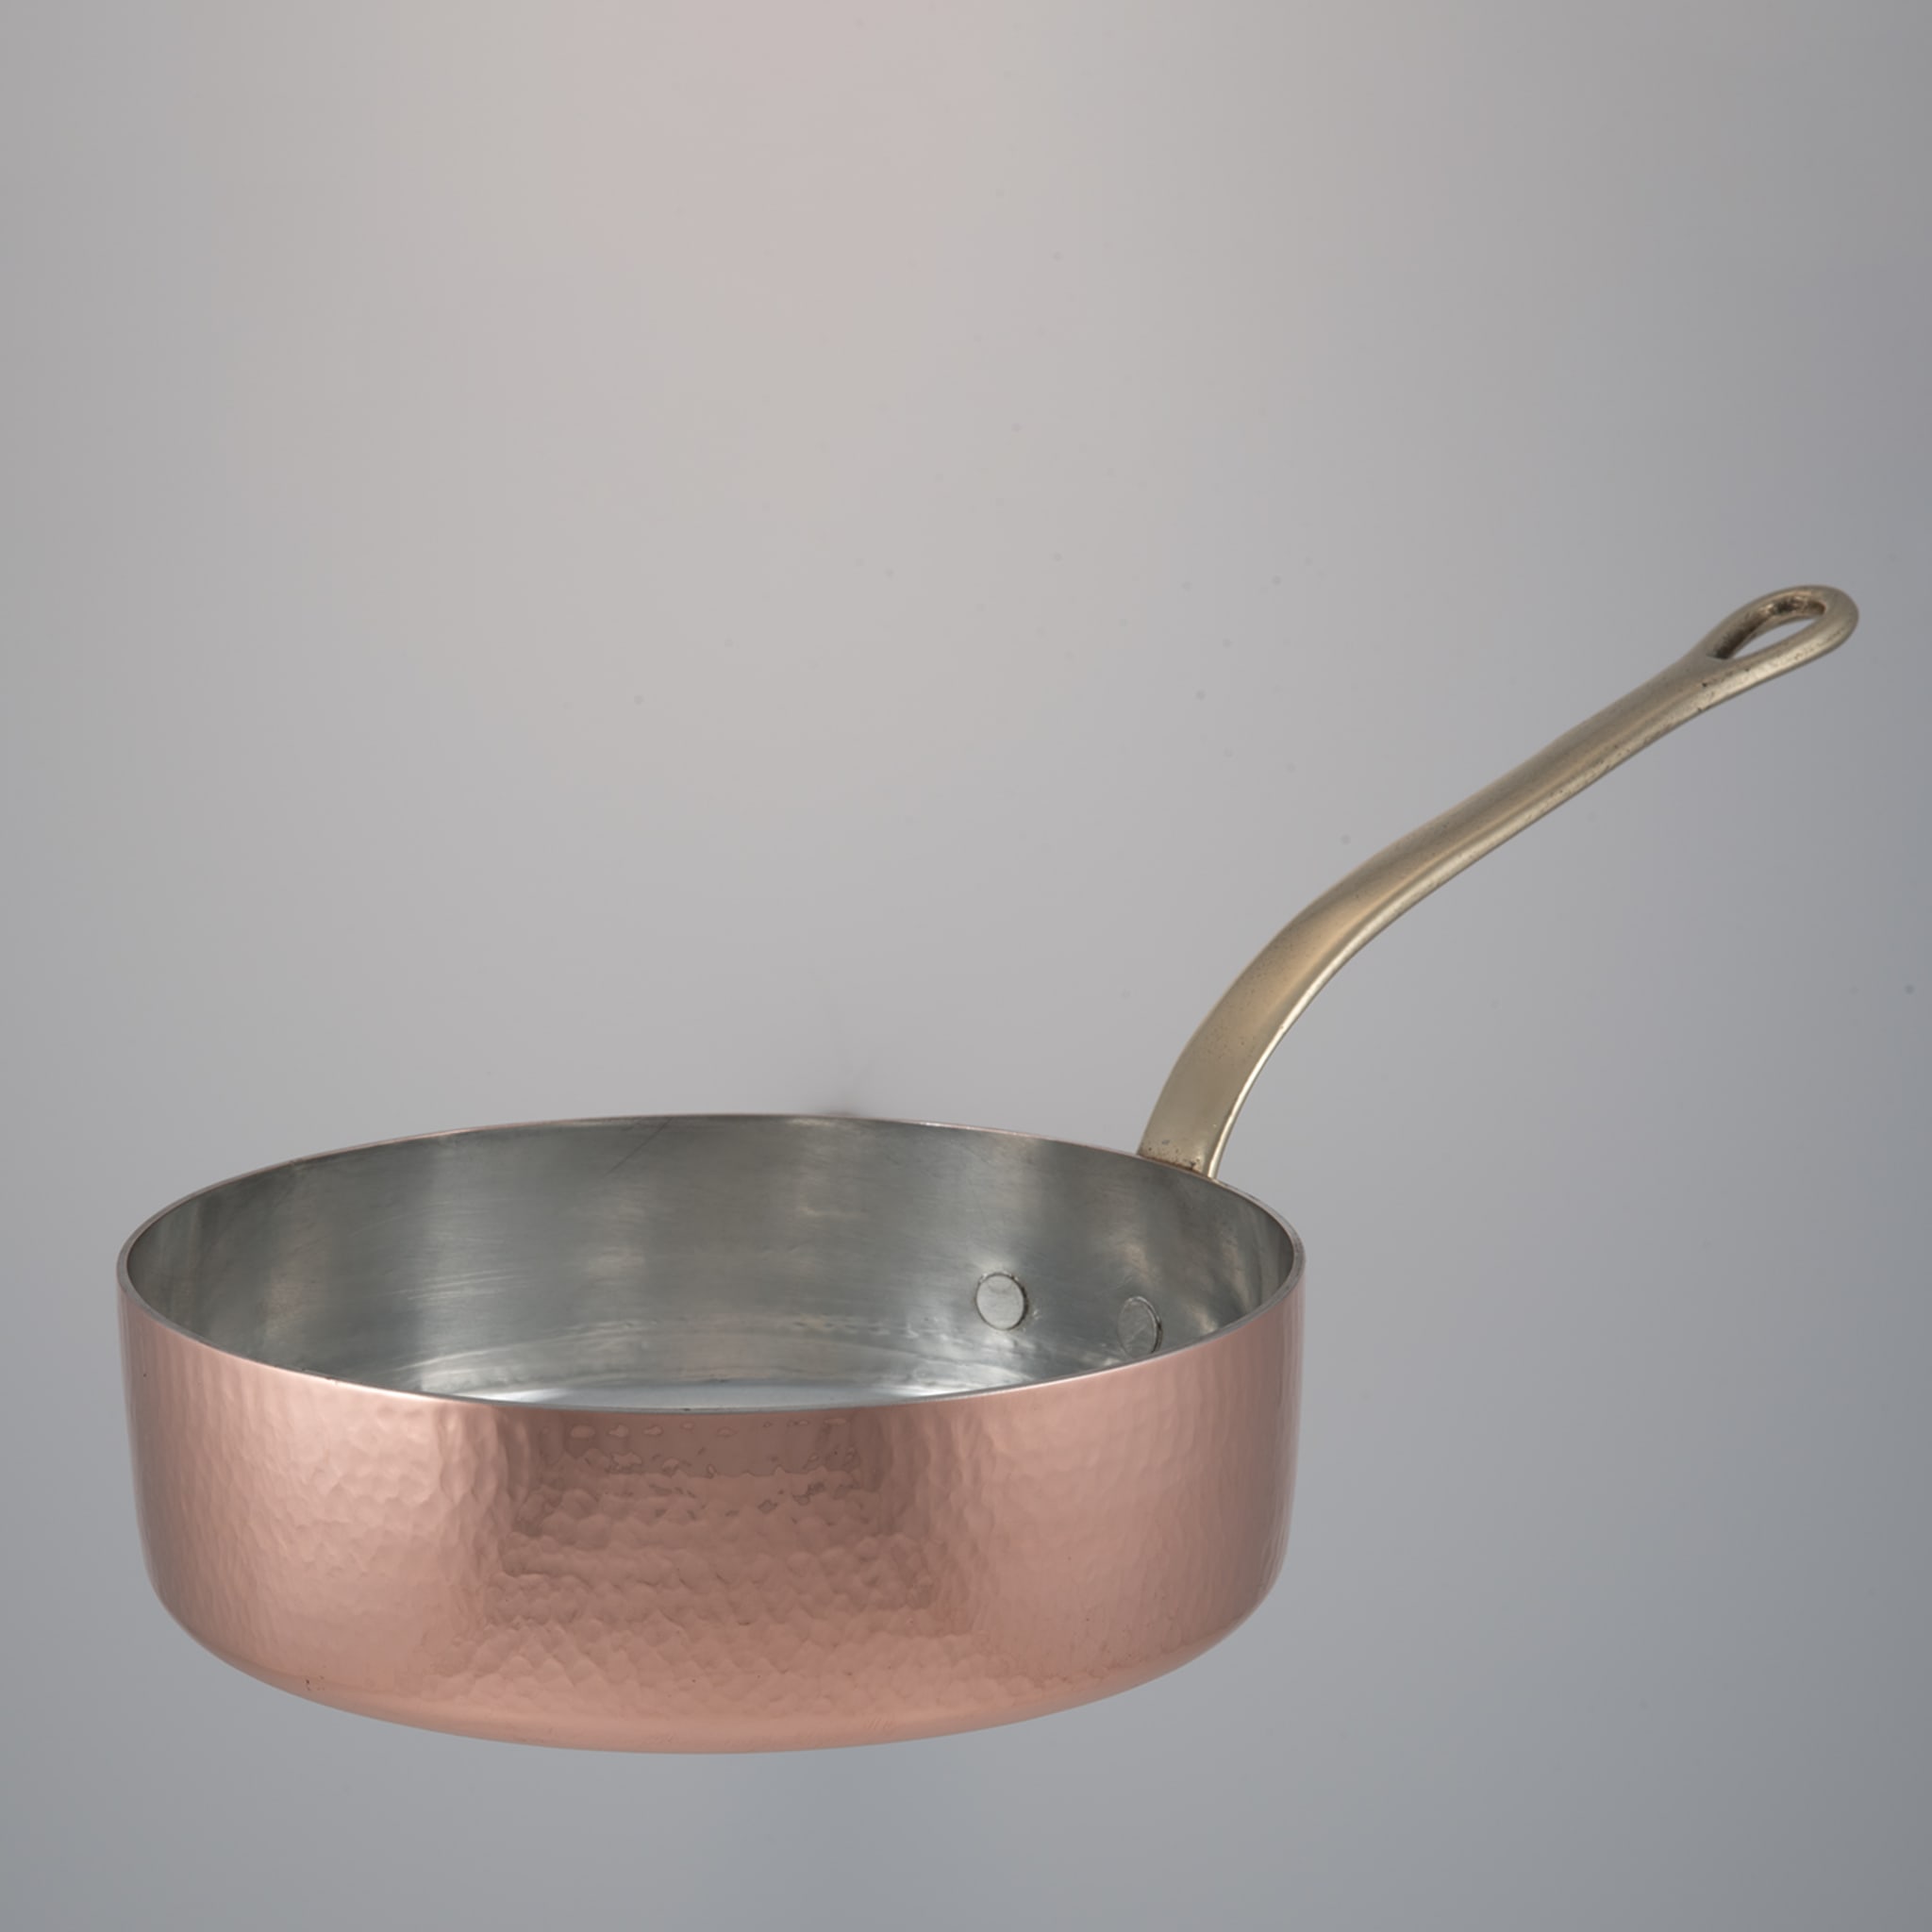 Silver lined Copper Saucepan Dish with Lid #2 - Alternative view 2